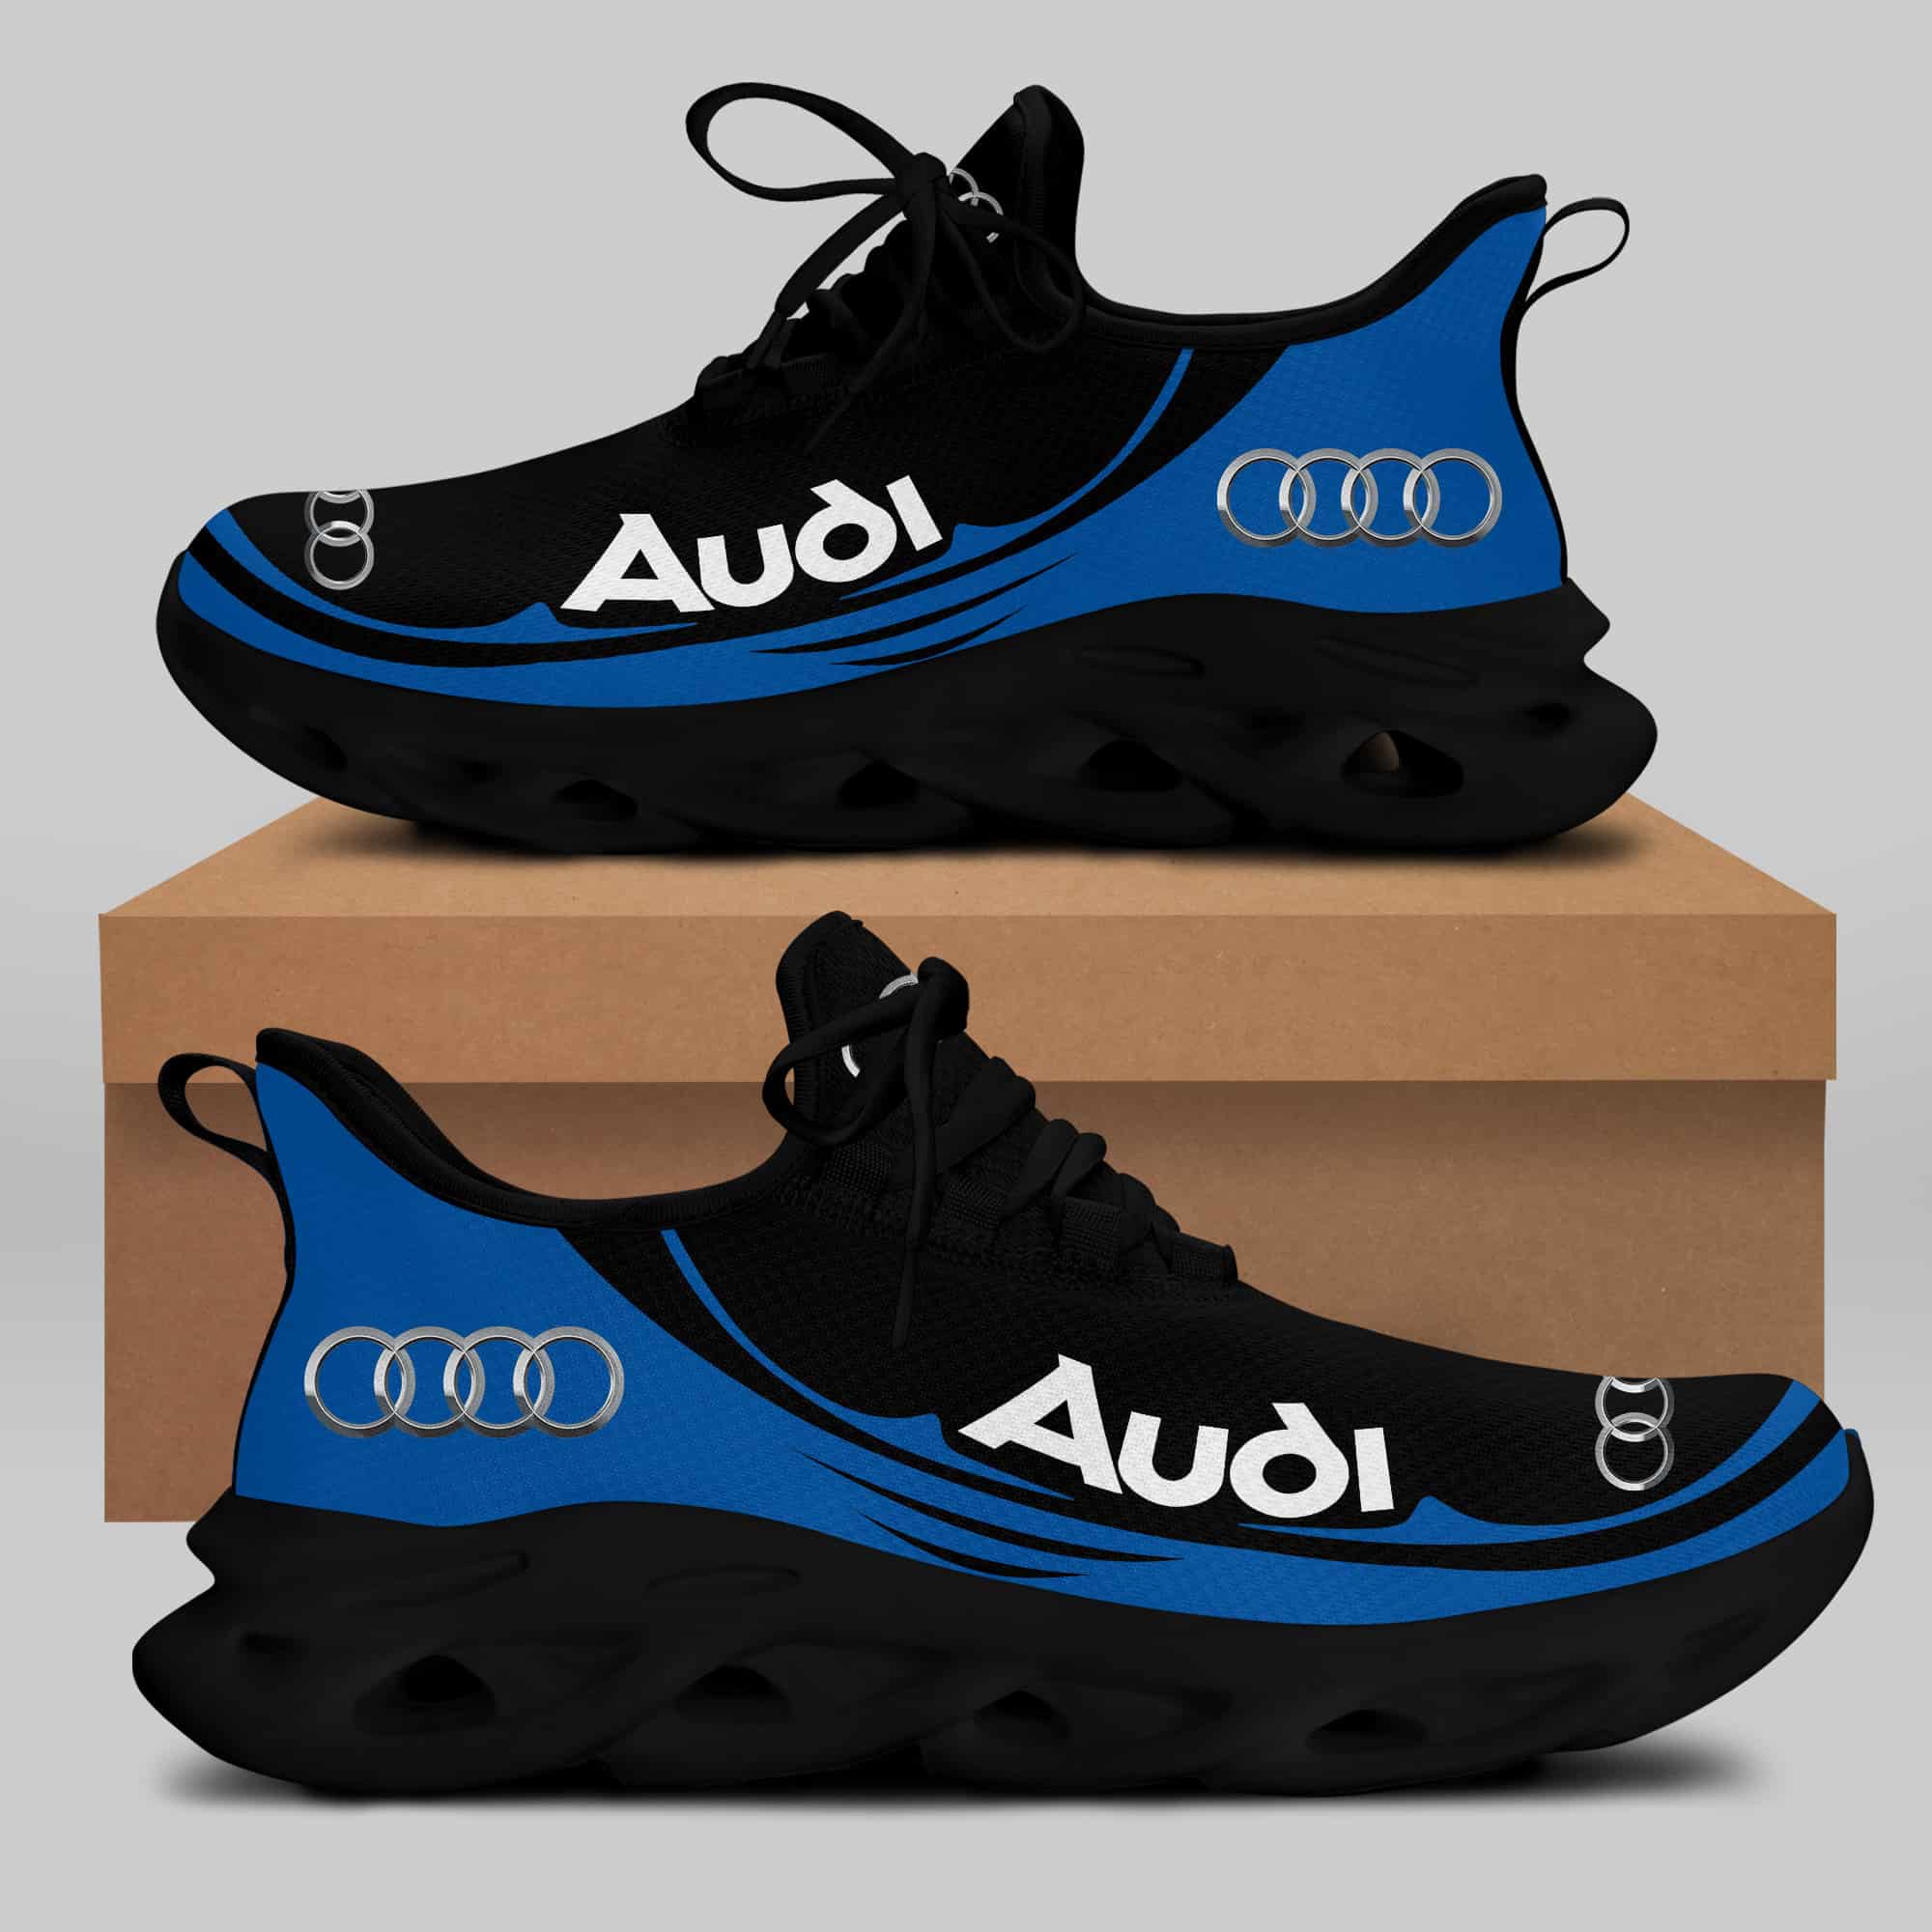 Audi Sport Running Shoes Max Soul Shoes Sneakers Ver 44 1